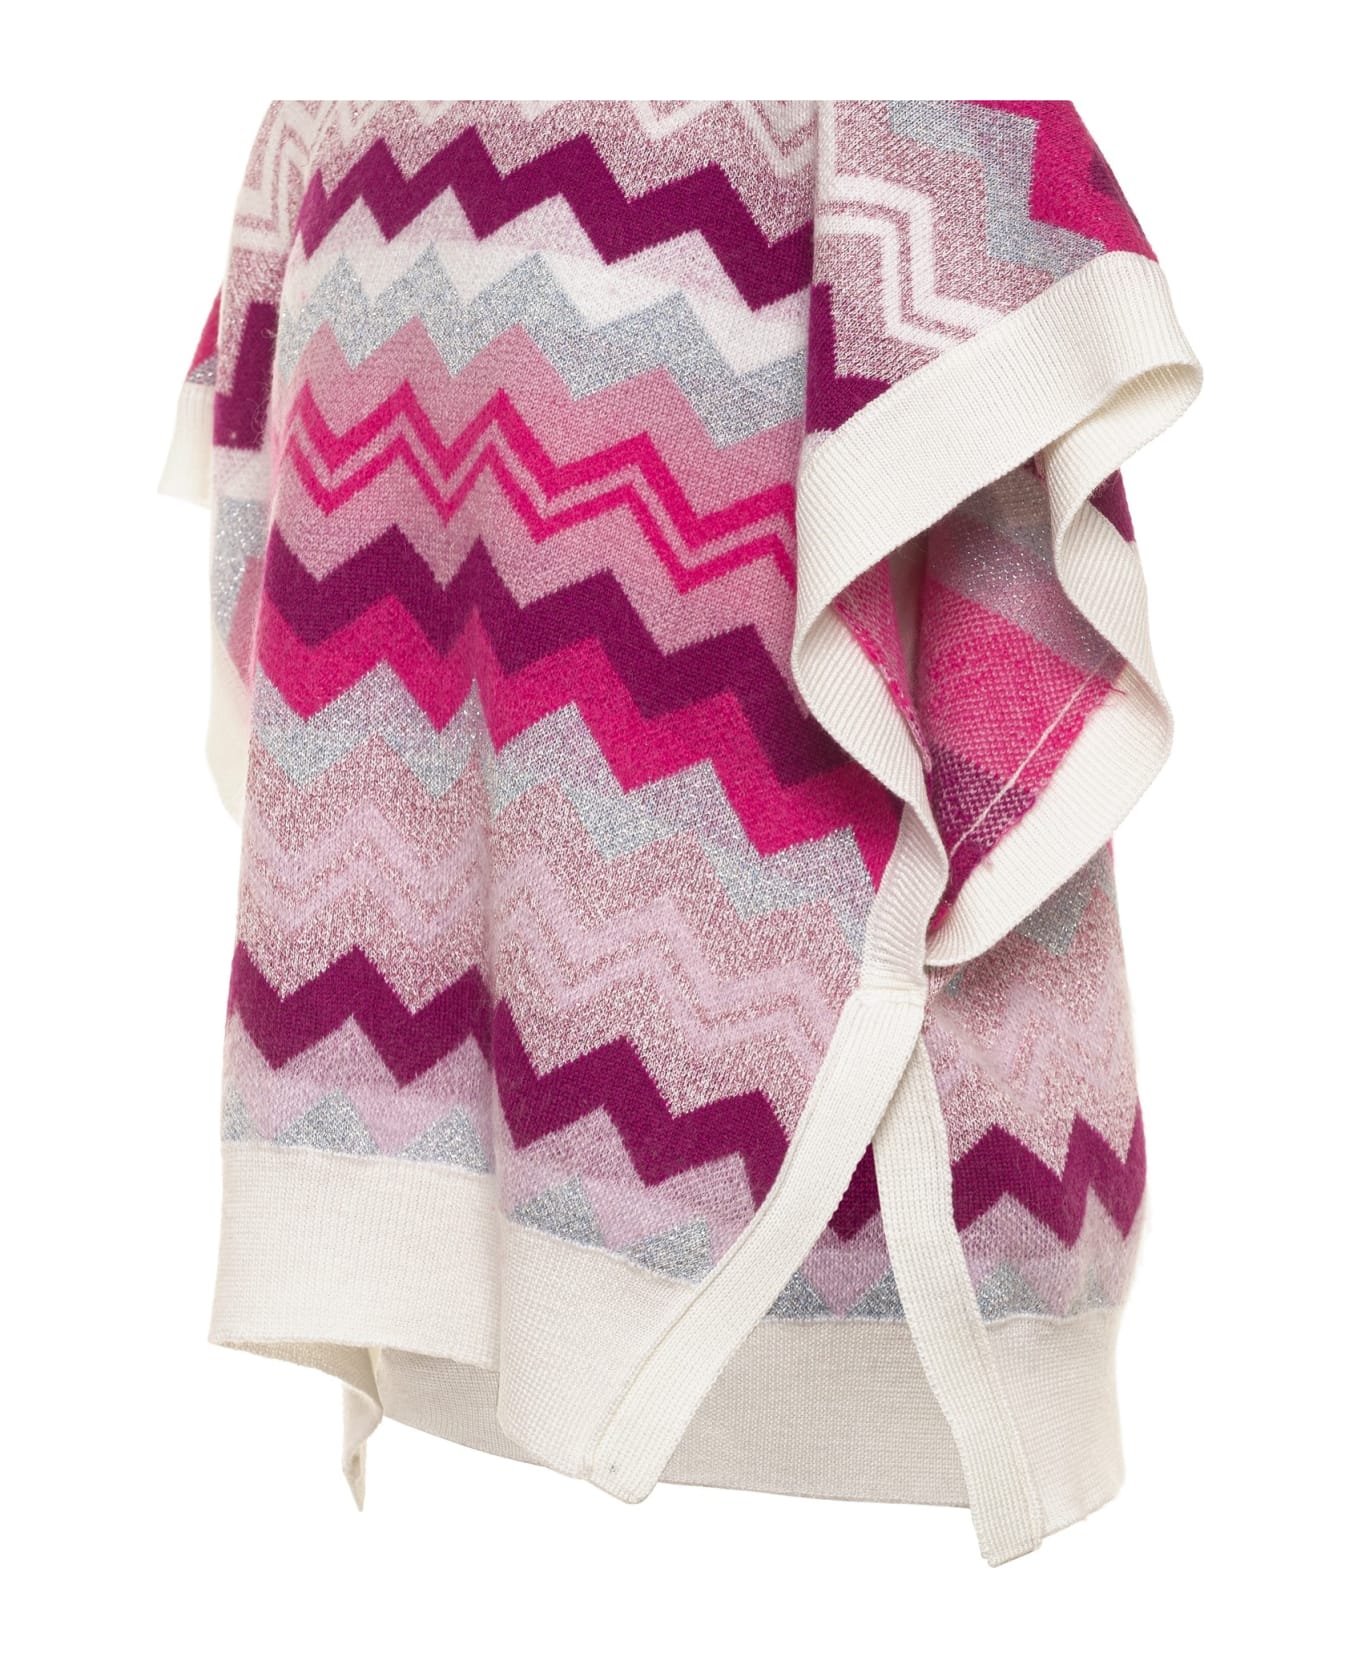 Missoni Kids Knitted Dress - Multicolor